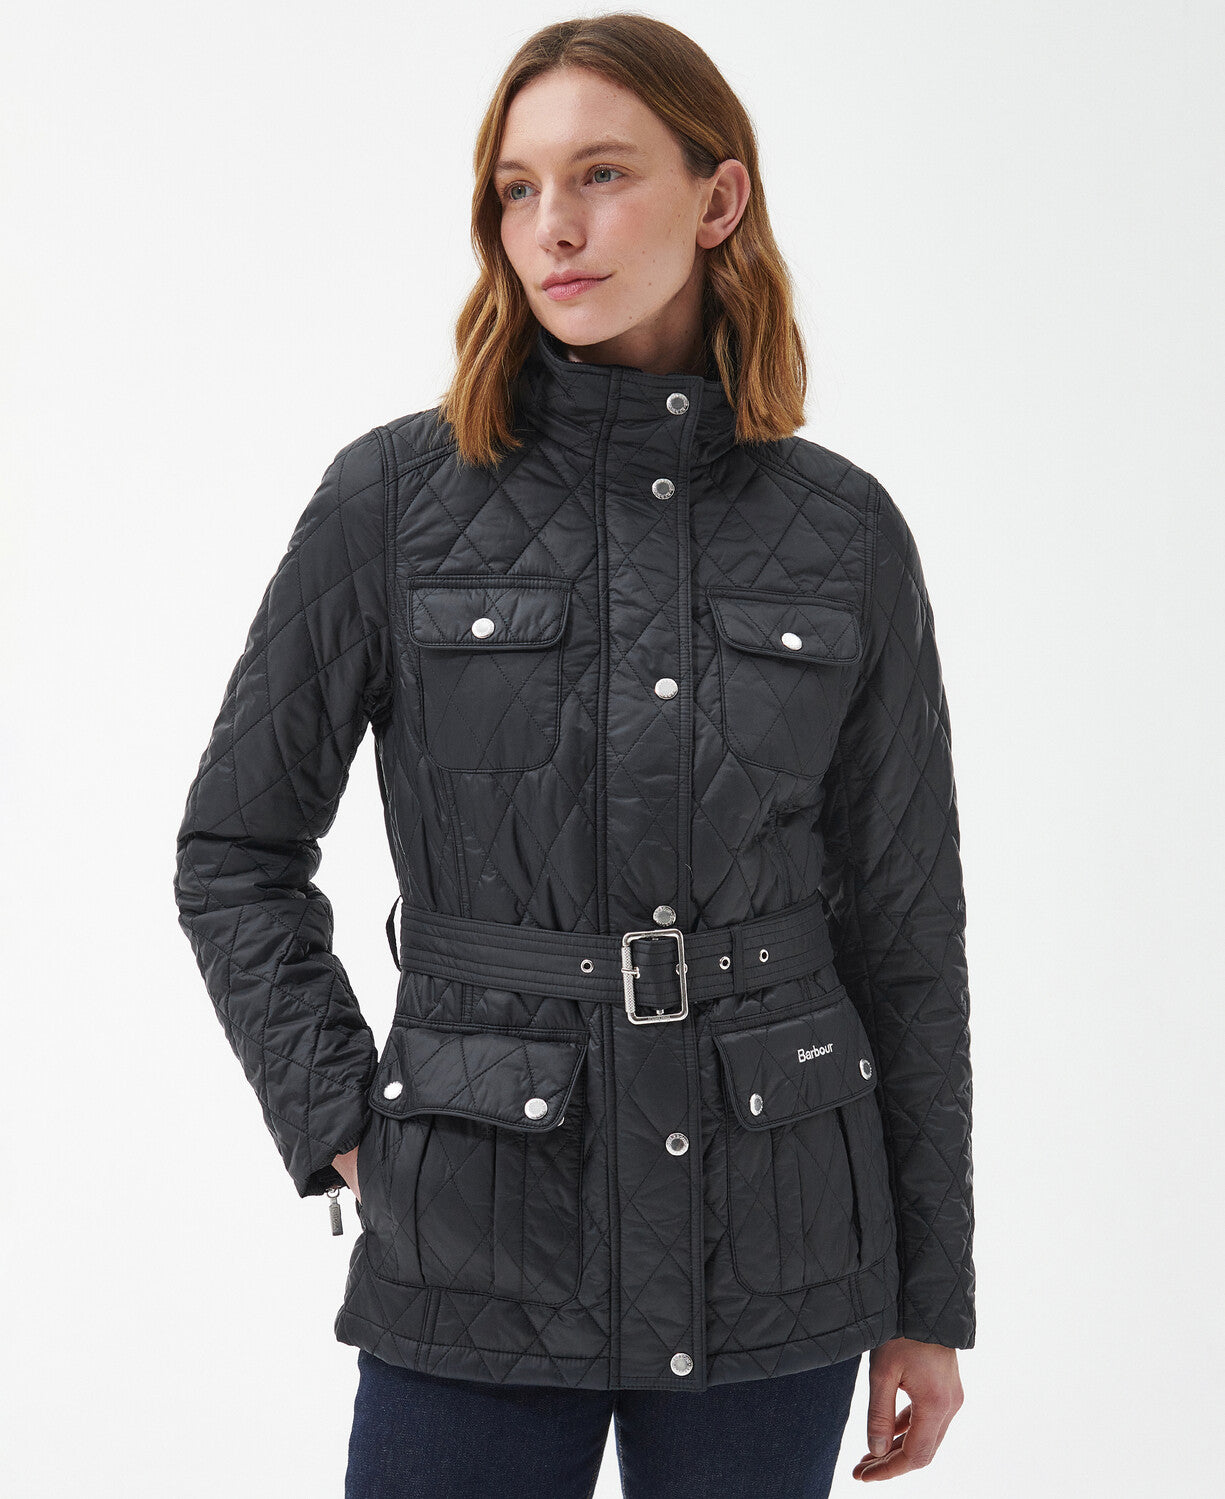 Barbour Country Utility Quilted Jacket - Classic Black/Rose Garden Floral